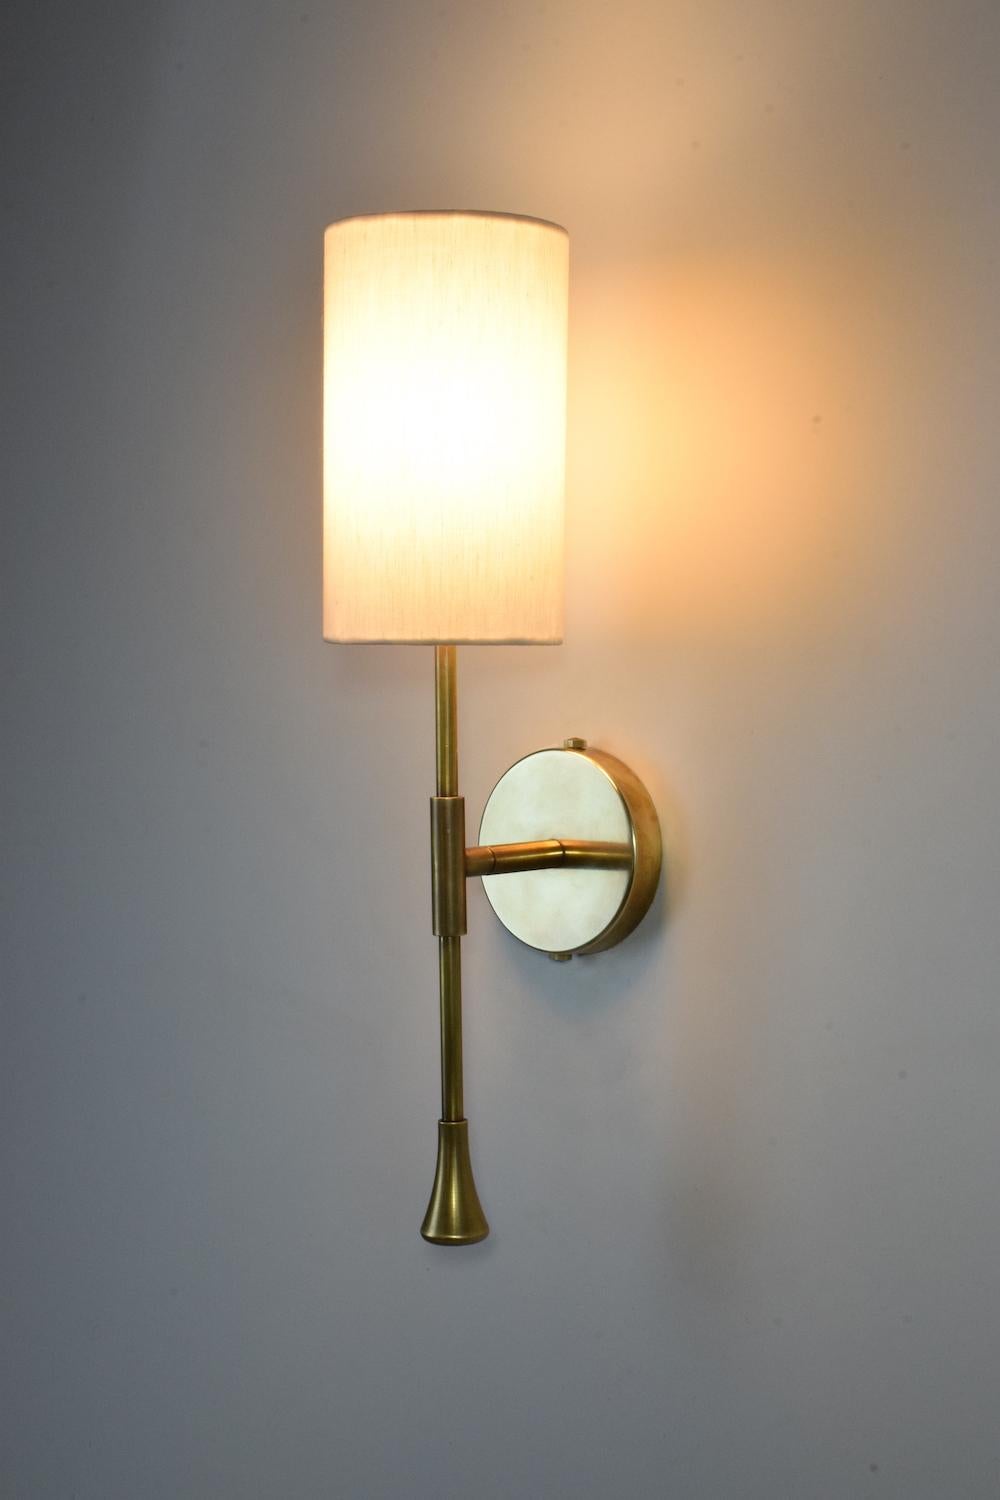 A timeless wall light built in a solid brass structure with a cylinder white fabric shade and optional modern or oriental hand-engravings on the wall plate and stem.

Light source
1 x 60 W Max G9
230 V - LED Integrated 
120 V - LED.

This piece is